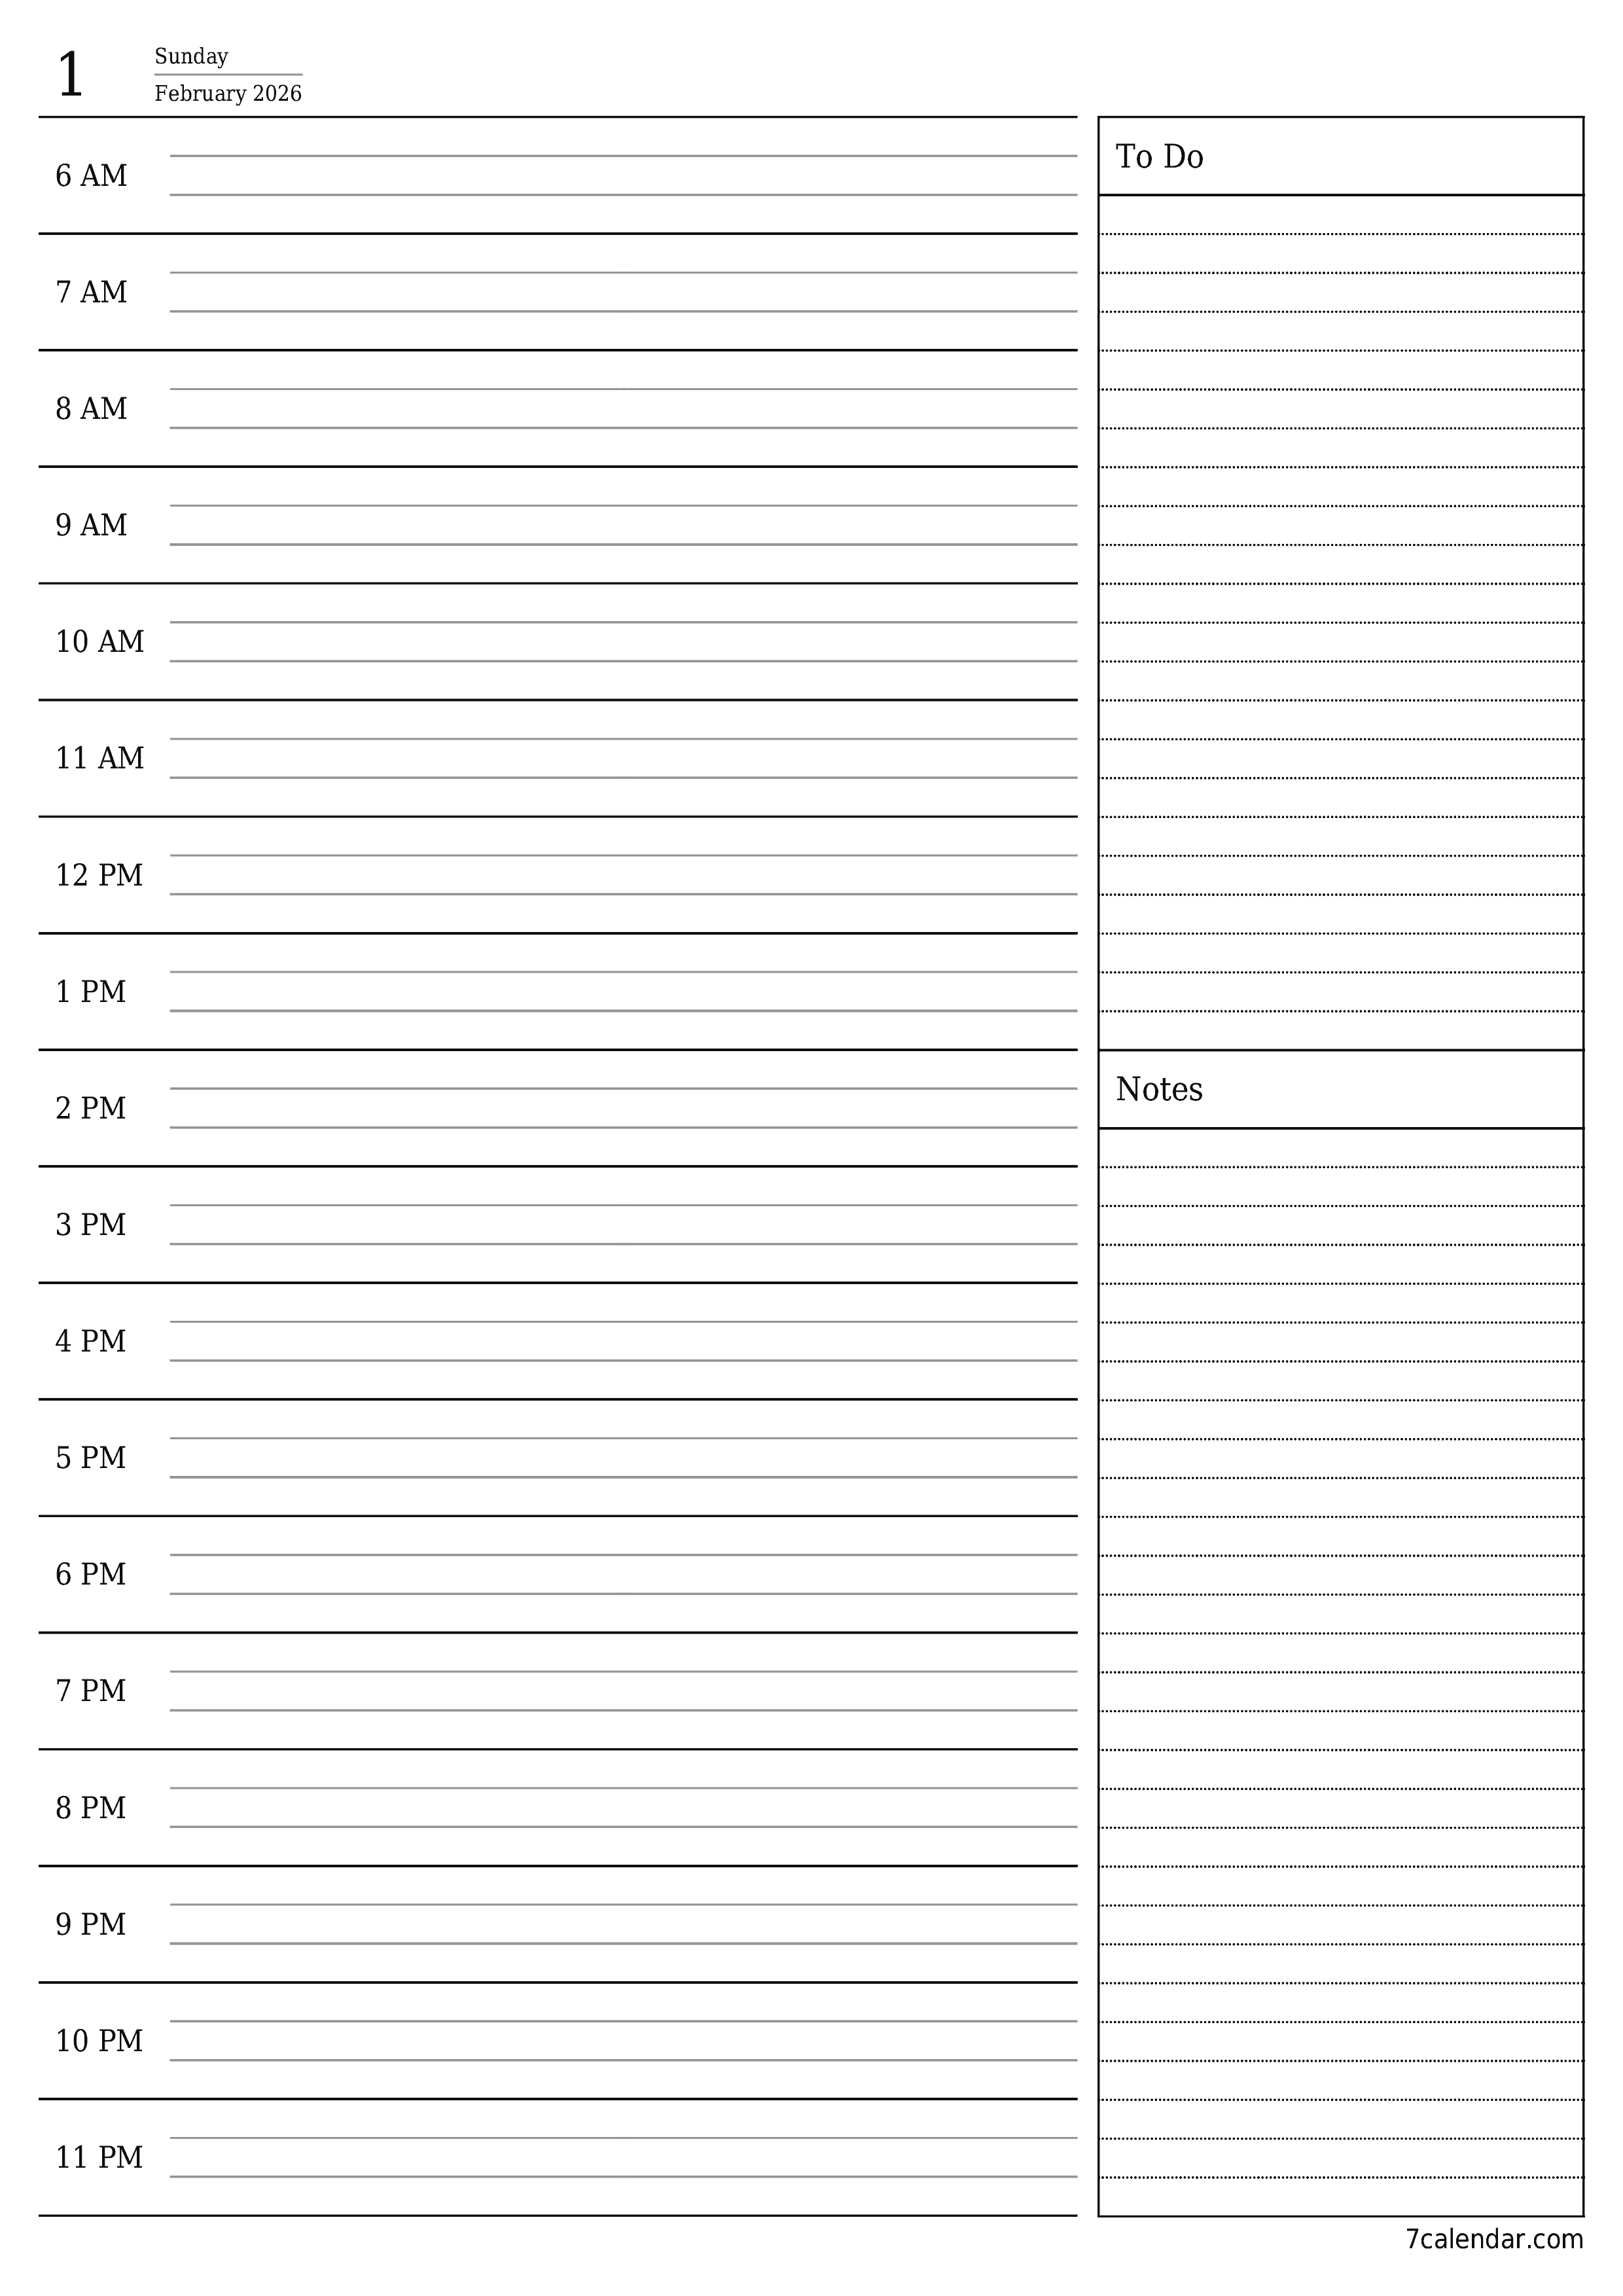 Blank daily printable calendar and planner for day February 2026 with notes, save and print to PDF PNG English